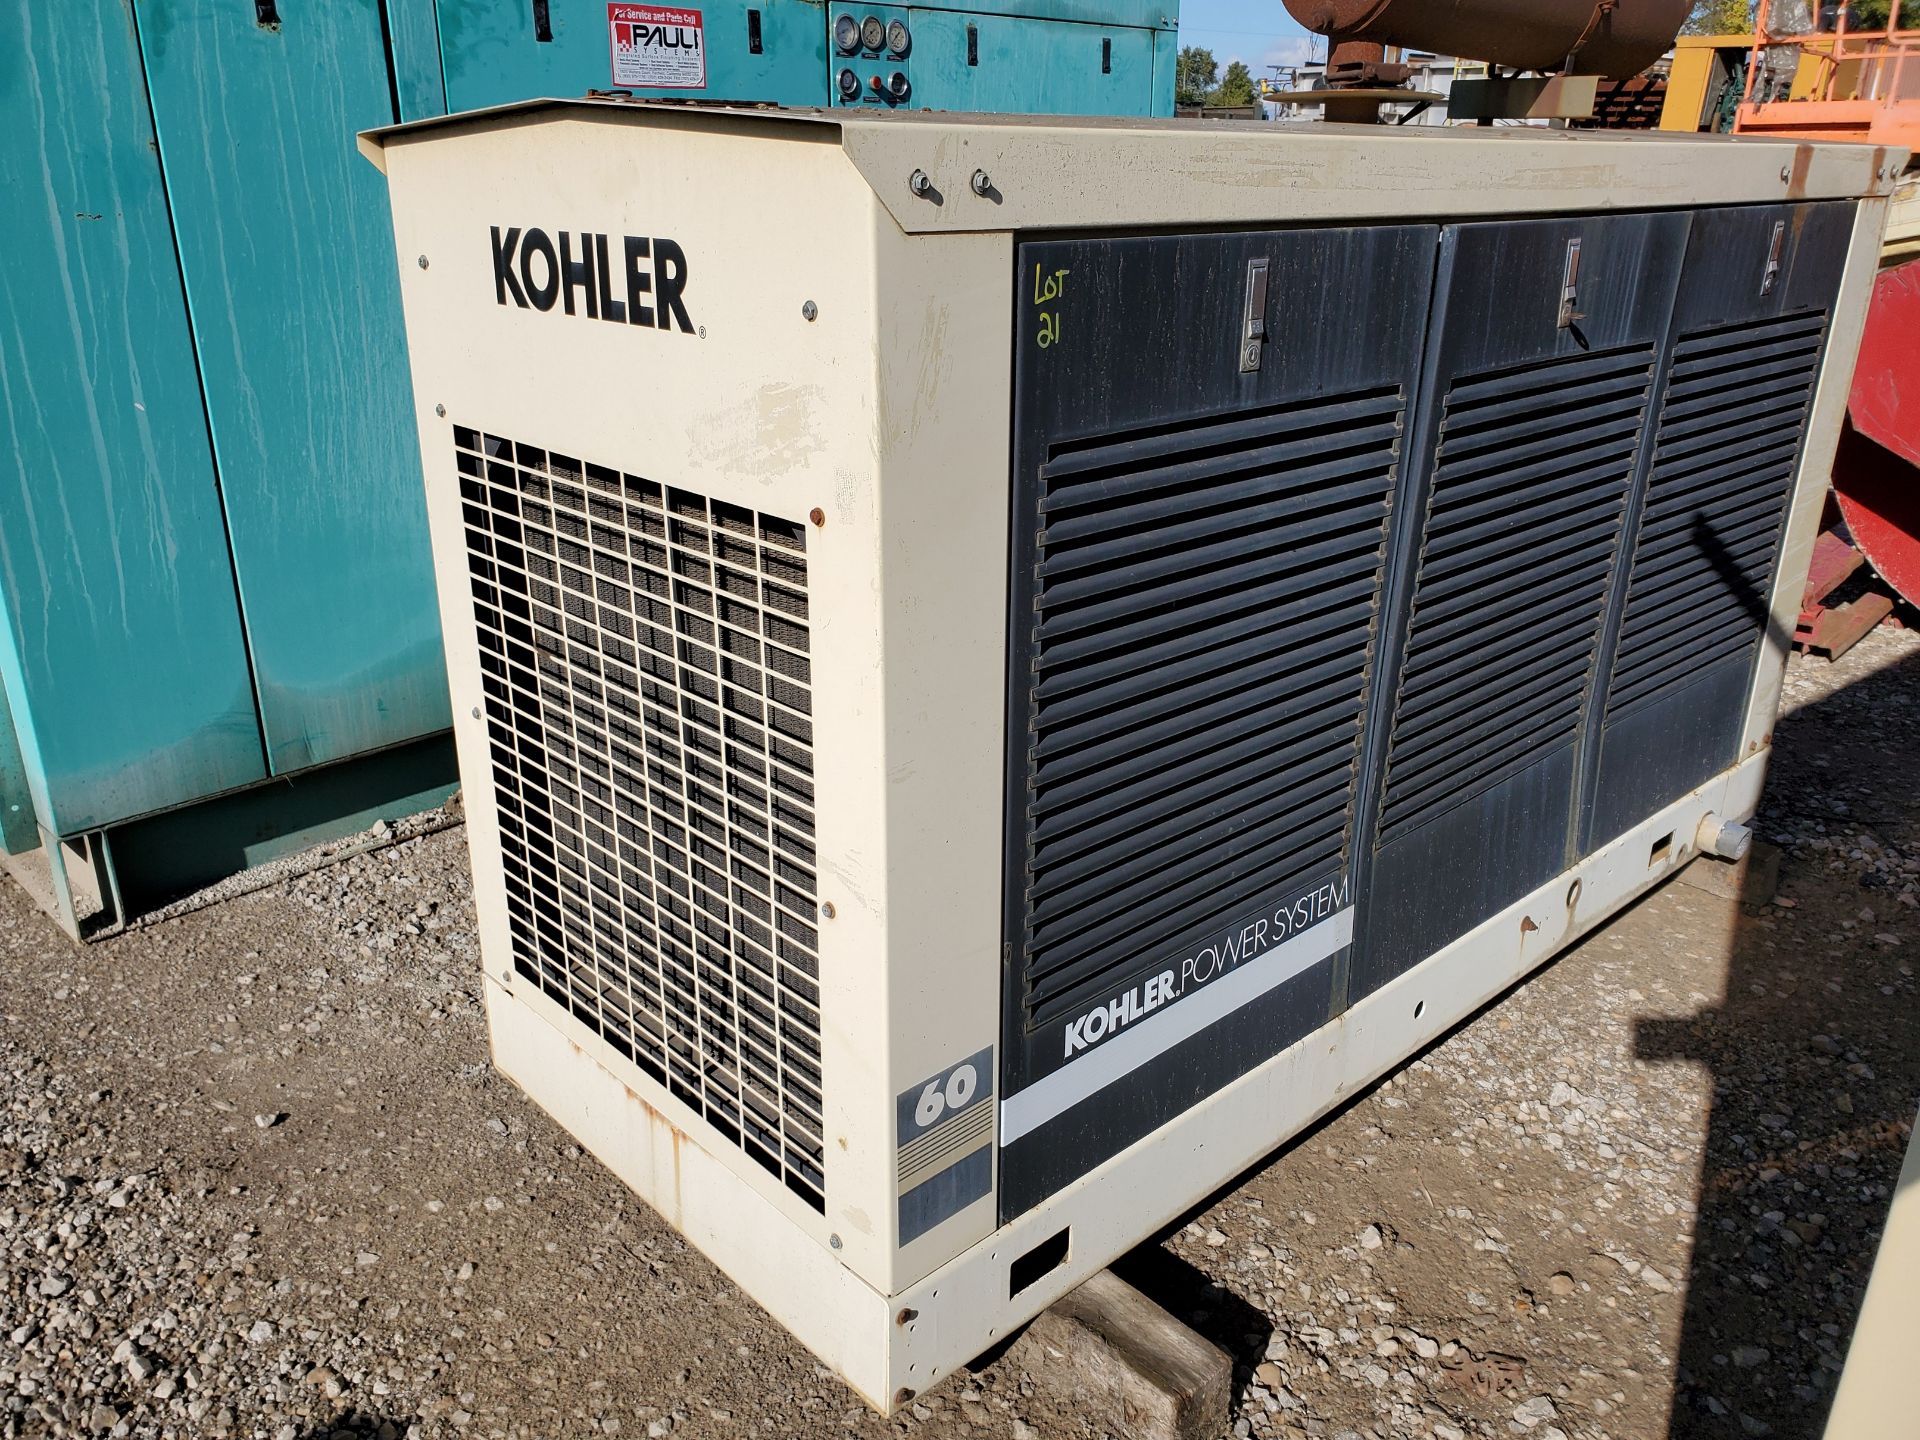 KOHLER NATURAL GAS POWER GENERATOR, MODEL 60RZ, AUTOMATIC 13V OUTPUT BATTERY CHARGER, 2000 YEAR FORD